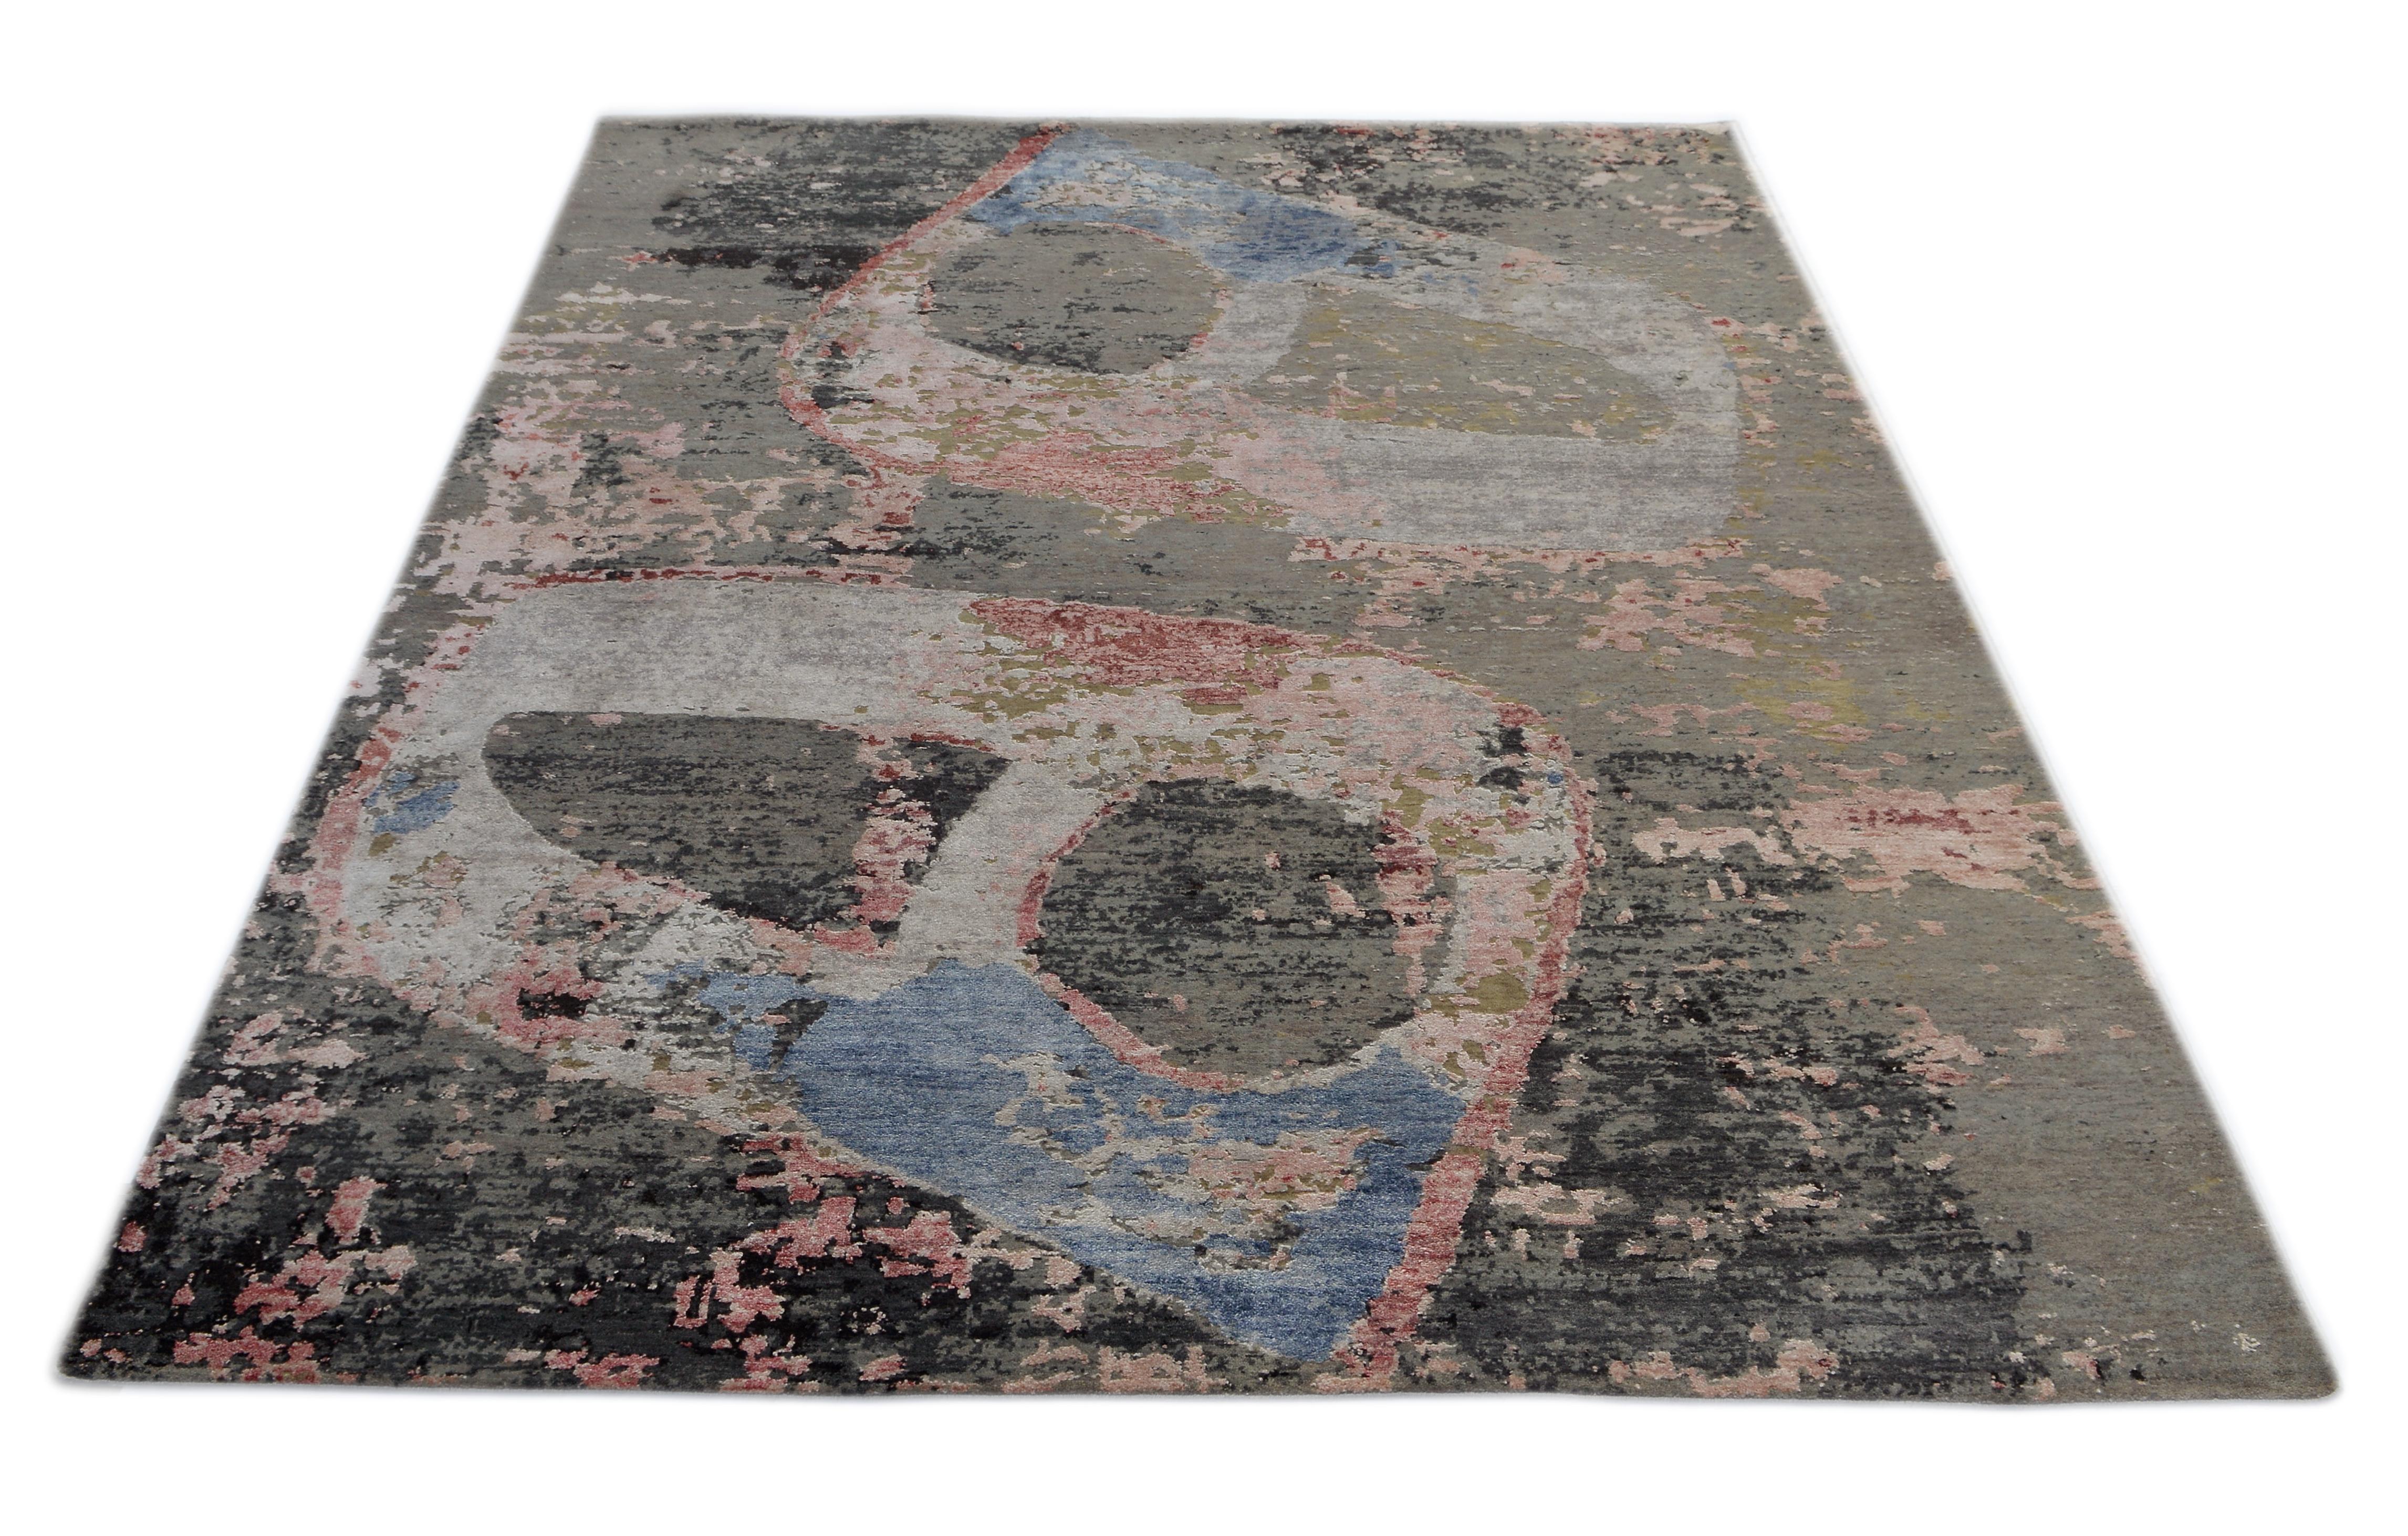 A new addition to the handmade rugs in the abstract rug line by Rug & Kilim, this 8'1